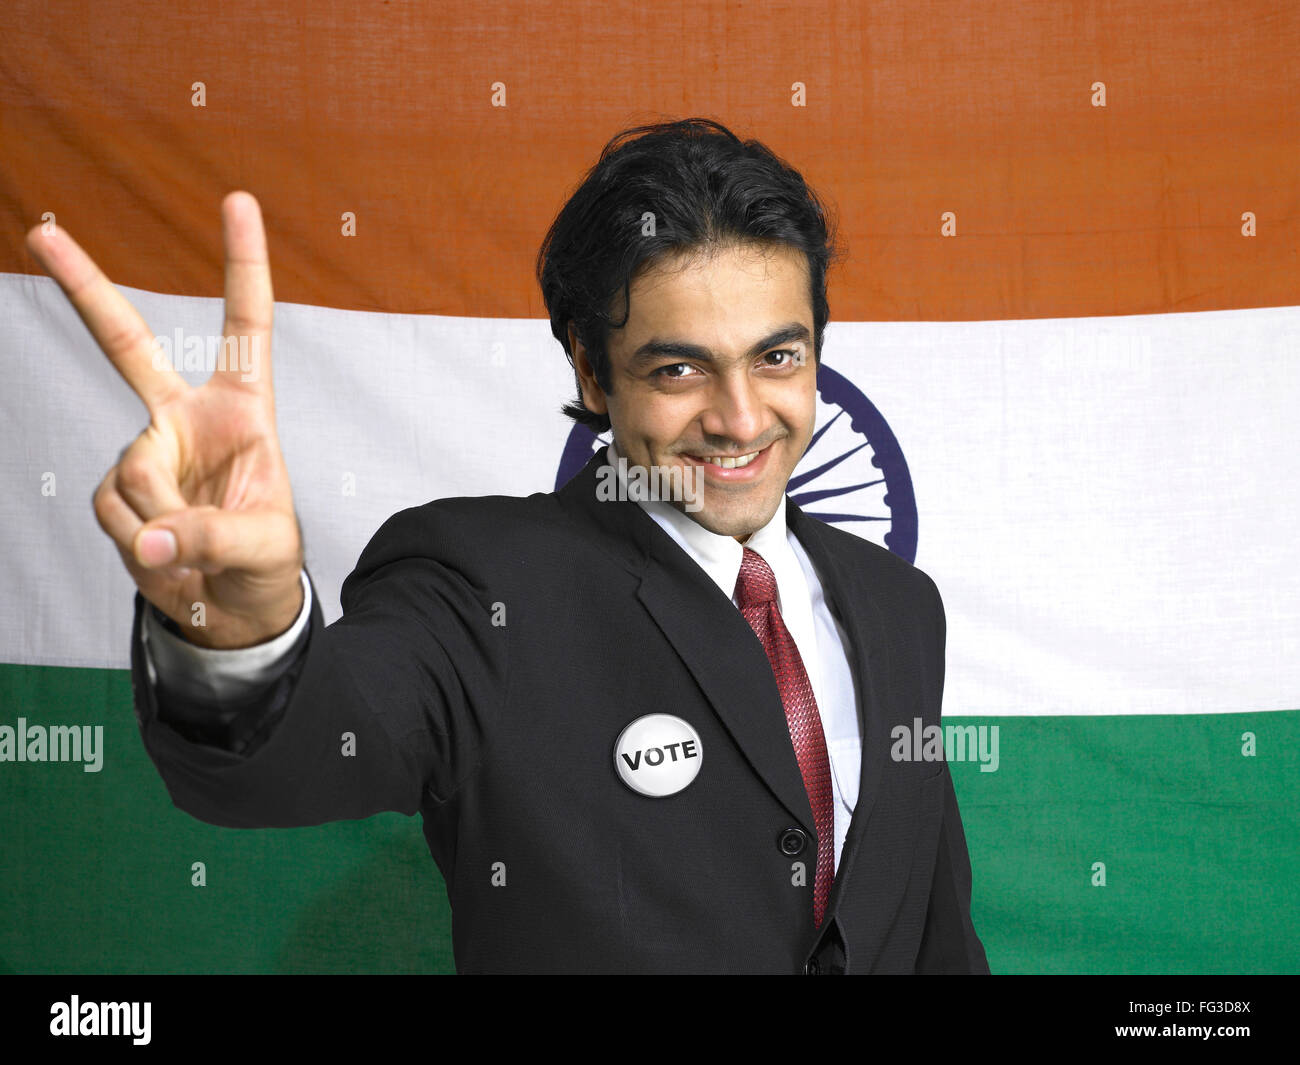 Executive showing victory sign standing in front of national flag of India MR#702A Stock Photo